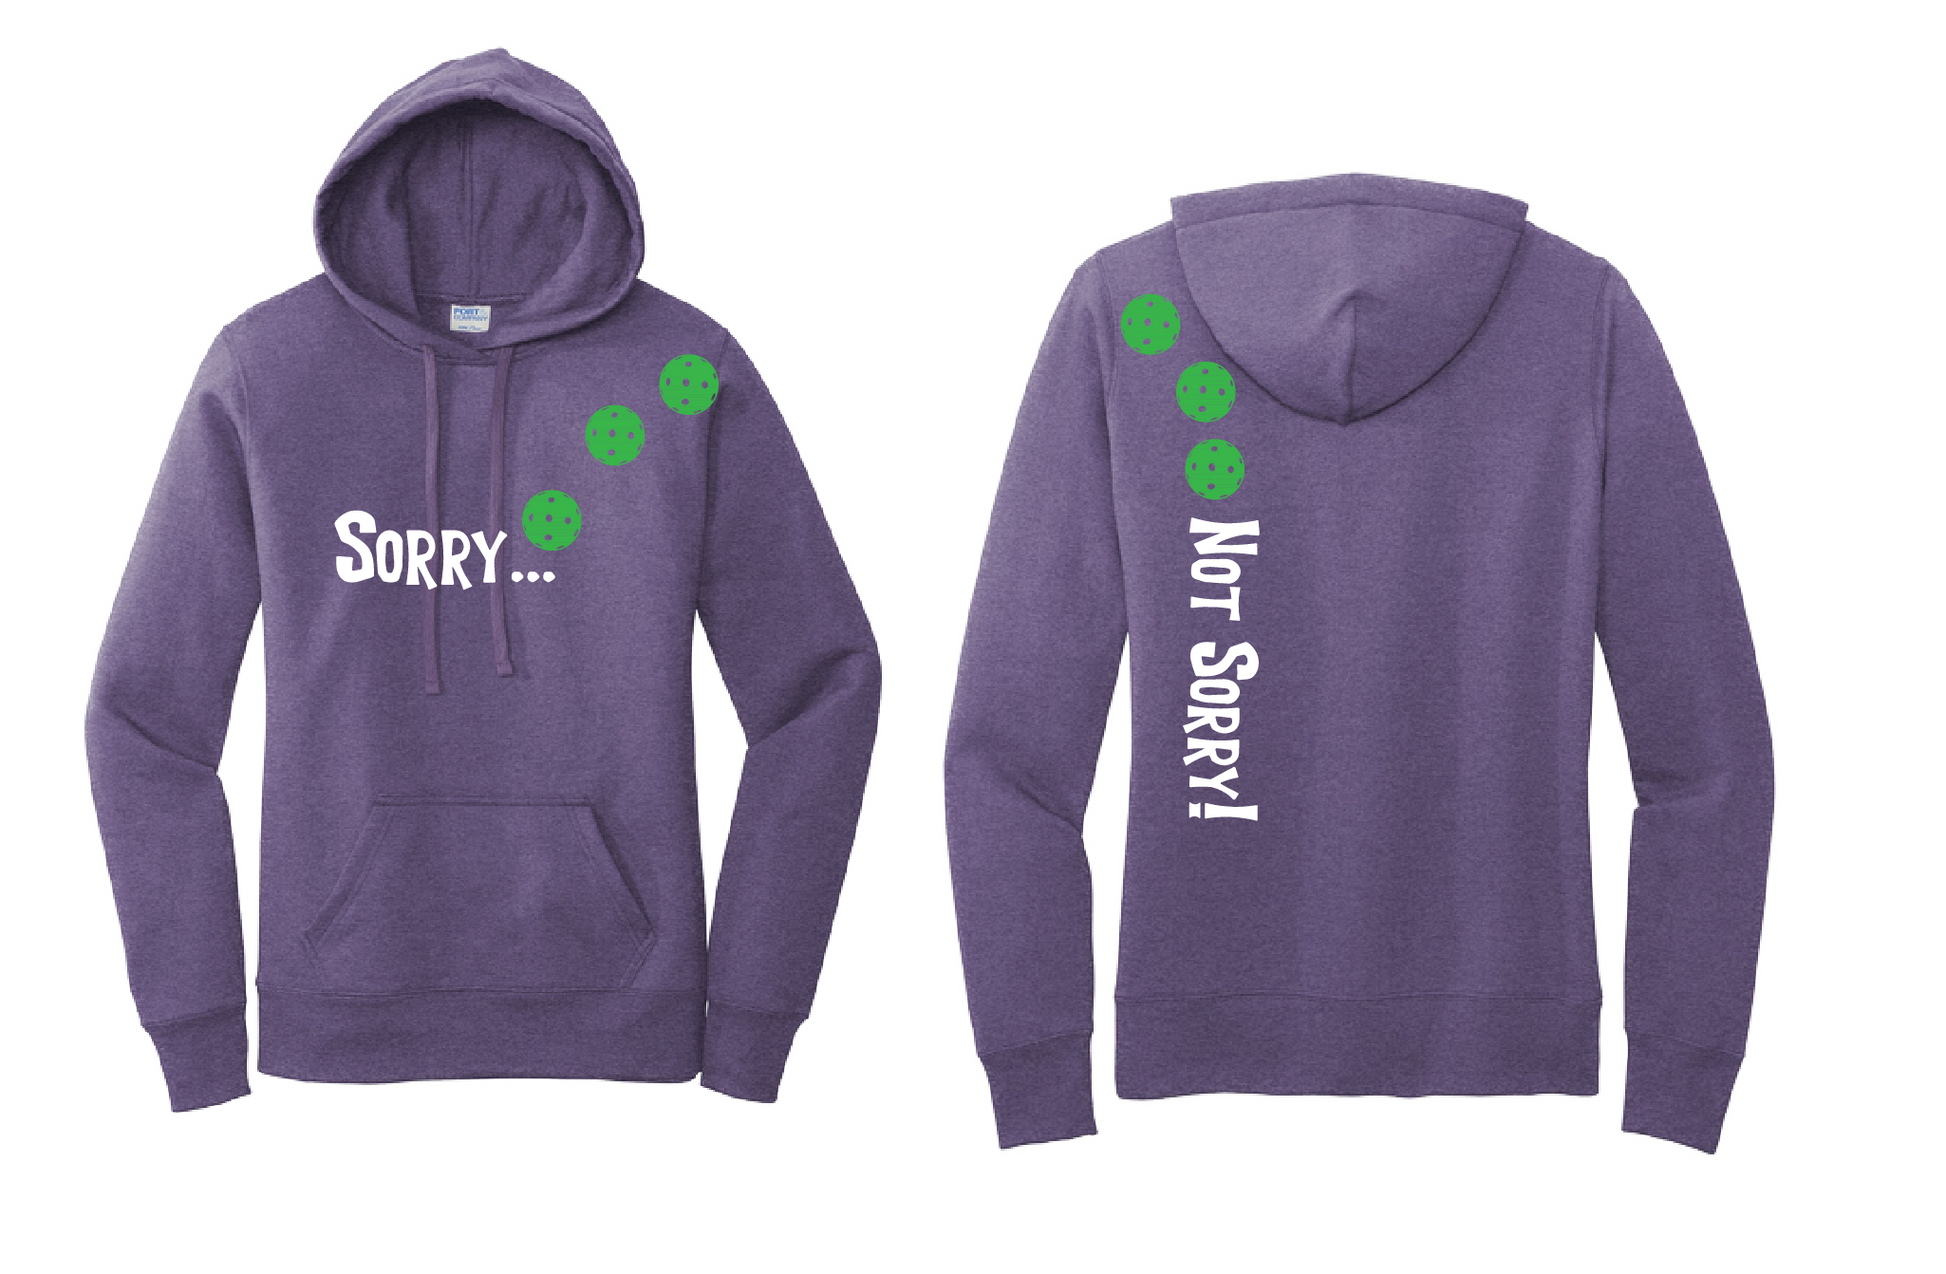 Pickleball Design: Sorry...Not Sorry!! with Customizable Ball Color – White, Green, Yellow or Pink Balls Women's Fitted Hoodie Sweatshirt-8 Ball Colors Turn up the volume in this Women's Sweatshirts with its perfect mix of softness and attitude. Ultra soft lined inside with a lined hood also. This is fitted nicely for a women's figure. Front pouch pocket.